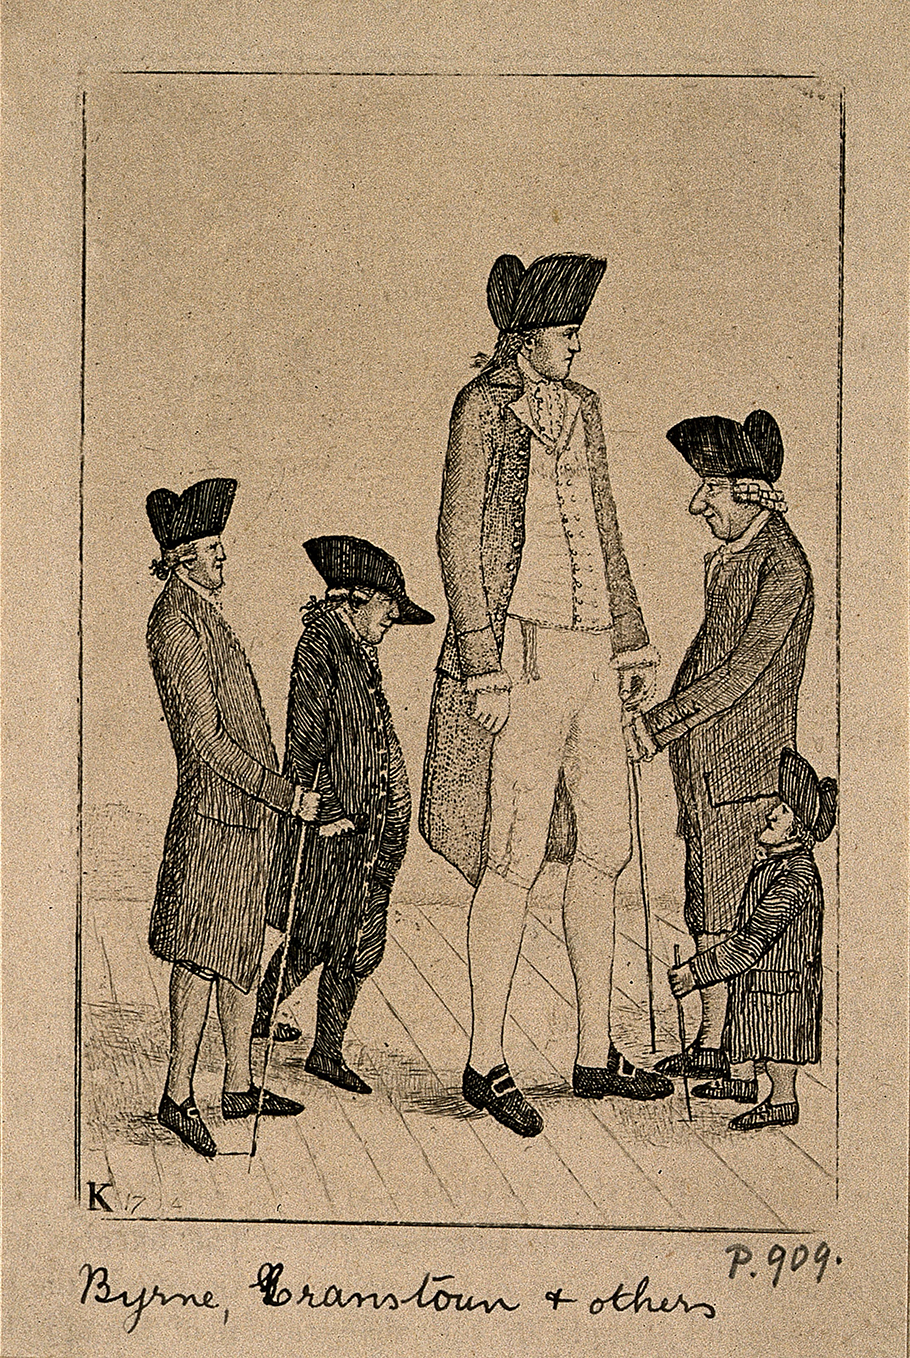 Charles Byrne, the Irish Giant, George Cranstoun, a dwarf, and three other normal sized men. Etching by J. Kay, 1794. This file comes from Wellcome Images, a website operated by Wellcome Trust, a global charitable foundation based in the United Kingdom.